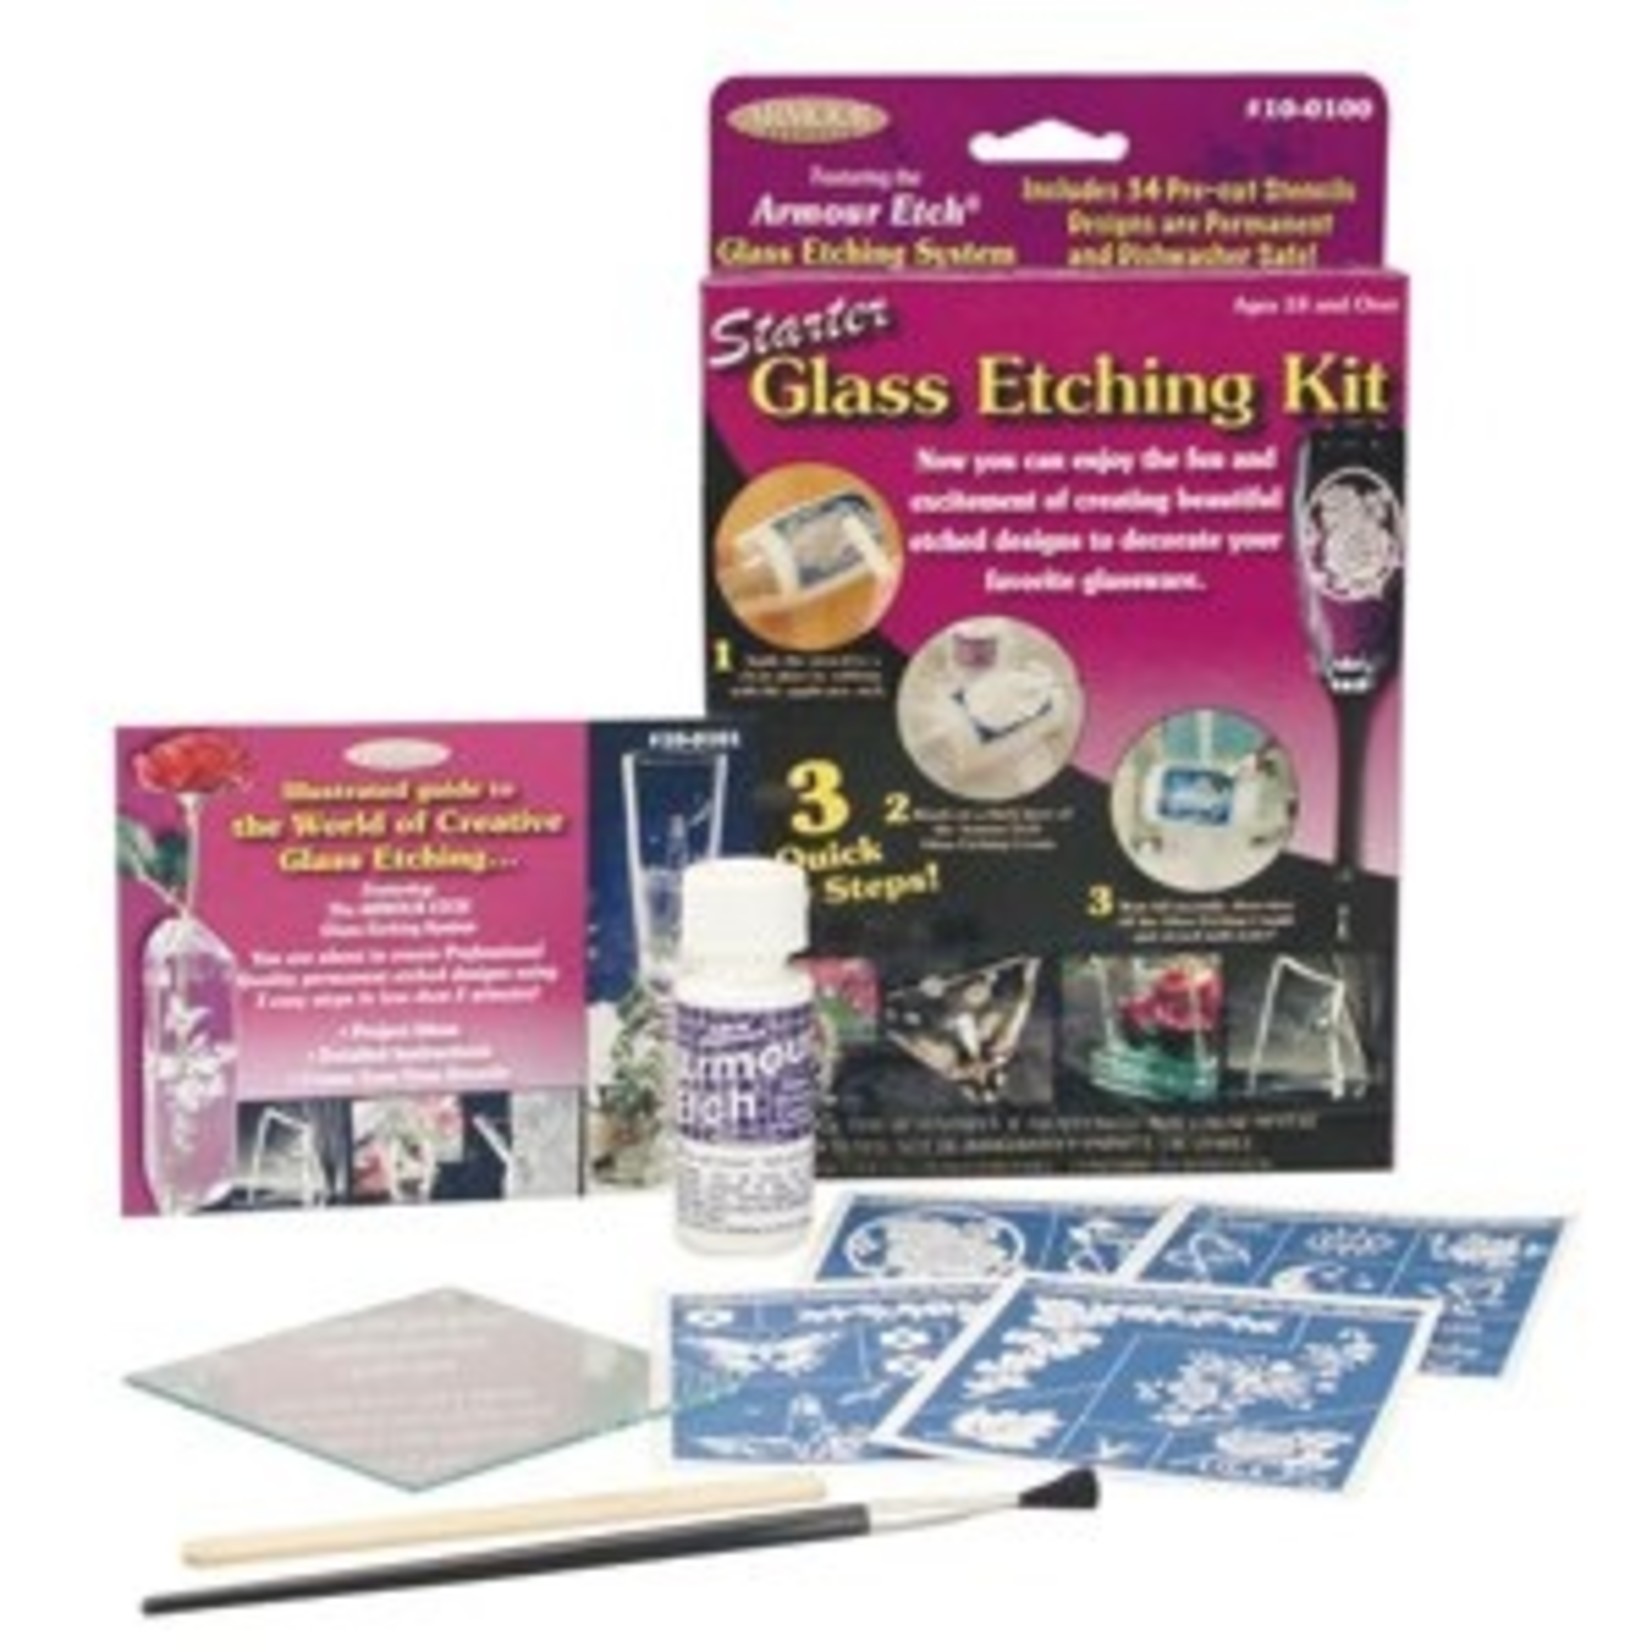 ARMOUR PRODUCTS ARMOUR ETCH GLASS ETCHING STARTER KIT